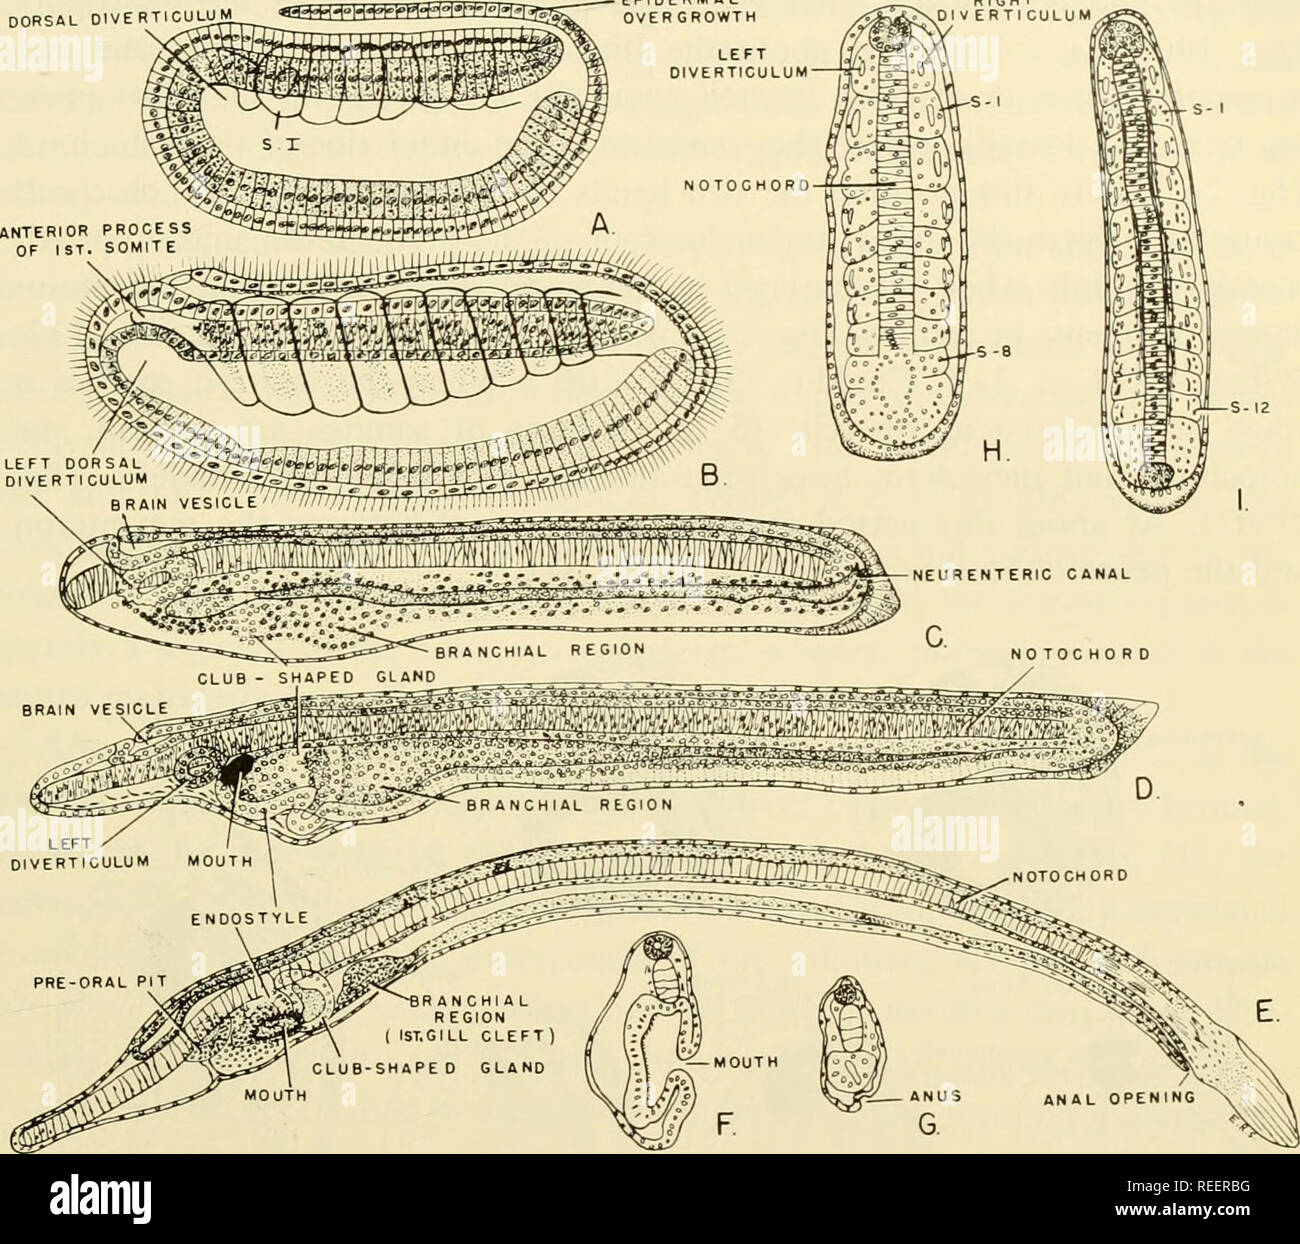 . Comparative embryology of the vertebrates; with 2057 drawings and photos. grouped as 380 illus. Vertebrates -- Embryology; Comparative embryology. TUBULATION OF ORGAN-FORMING AREAS IN AMPHIOXUS 503 5. TUBULATION OF THE MESODERM Tubulation of the mesoderm and the formation of a continuous antero- posterior coelom in Amphioxus differs considerably from that found in the subphylum Vertebrata. This fact becomes evident in tracing the history of the mesoderm from the time of its segregation from the entoderm of the late DORSAL DIV E R TIC UlA)M^«B=ffl^ffl-H''l°W°M--l-r|-|-'i;. Fig. 249. Various s Stock Photo